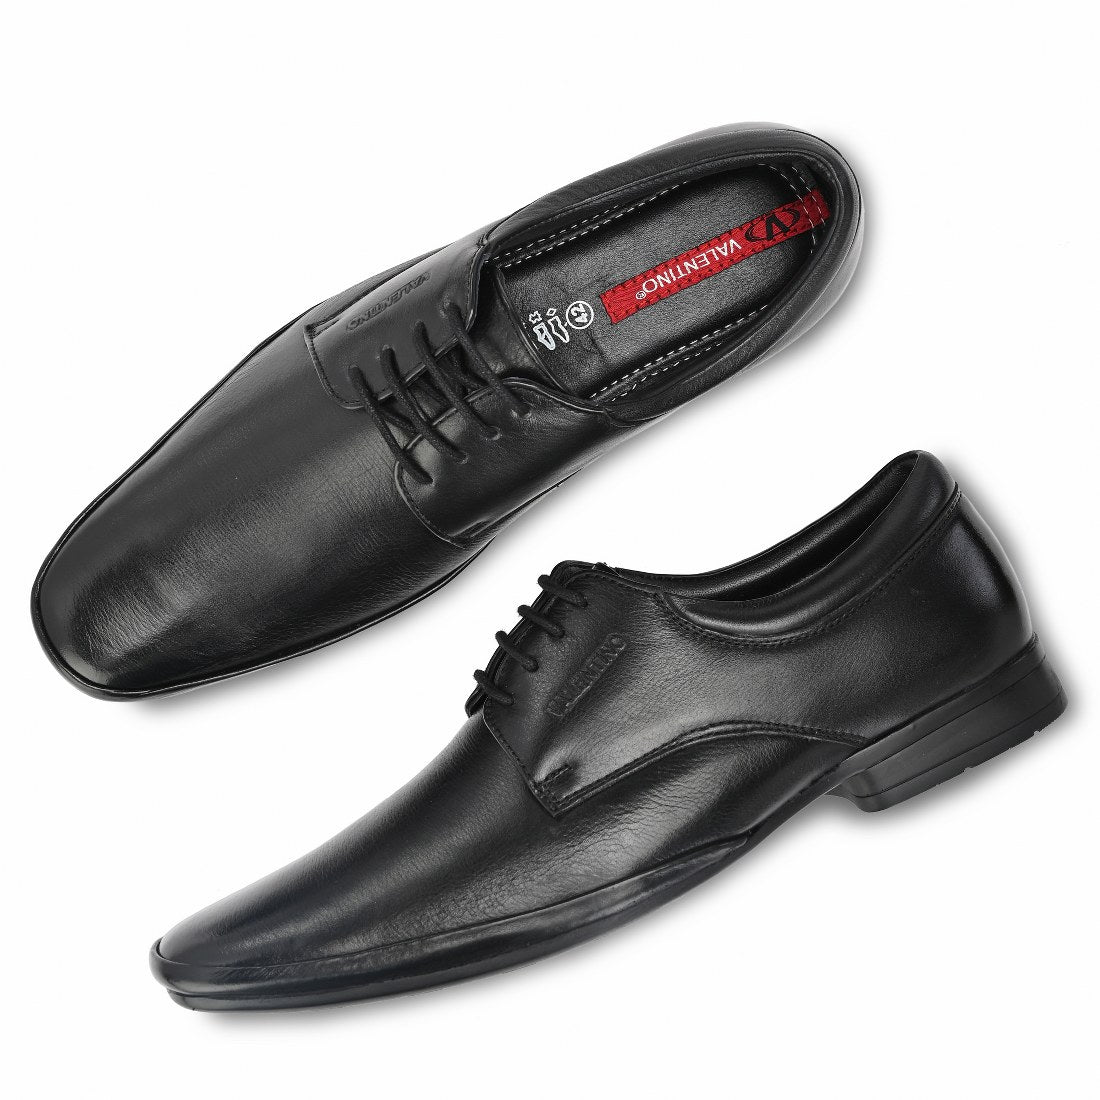 CALIFORNIA-52A MEN LEATHER BLACK FORMAL LACE UP DERBY